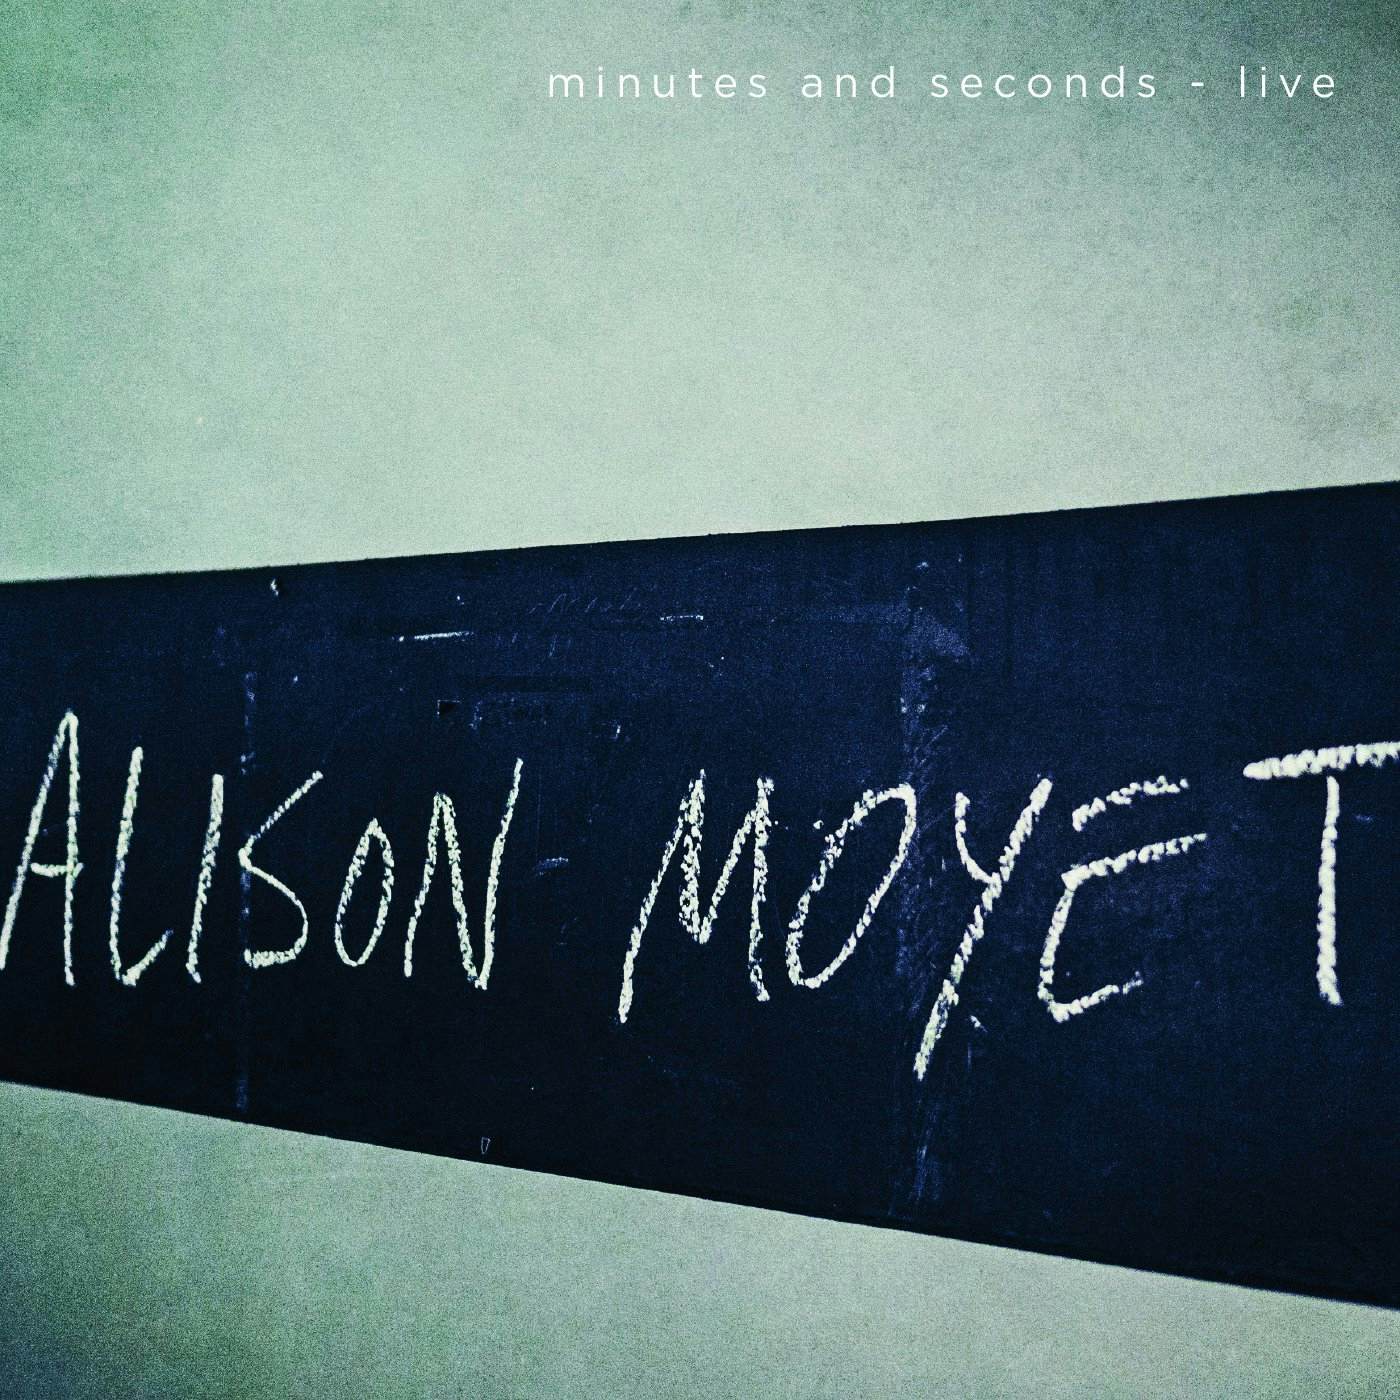 Alison Moyet MINUTES AND SECONDS-LIVE CD